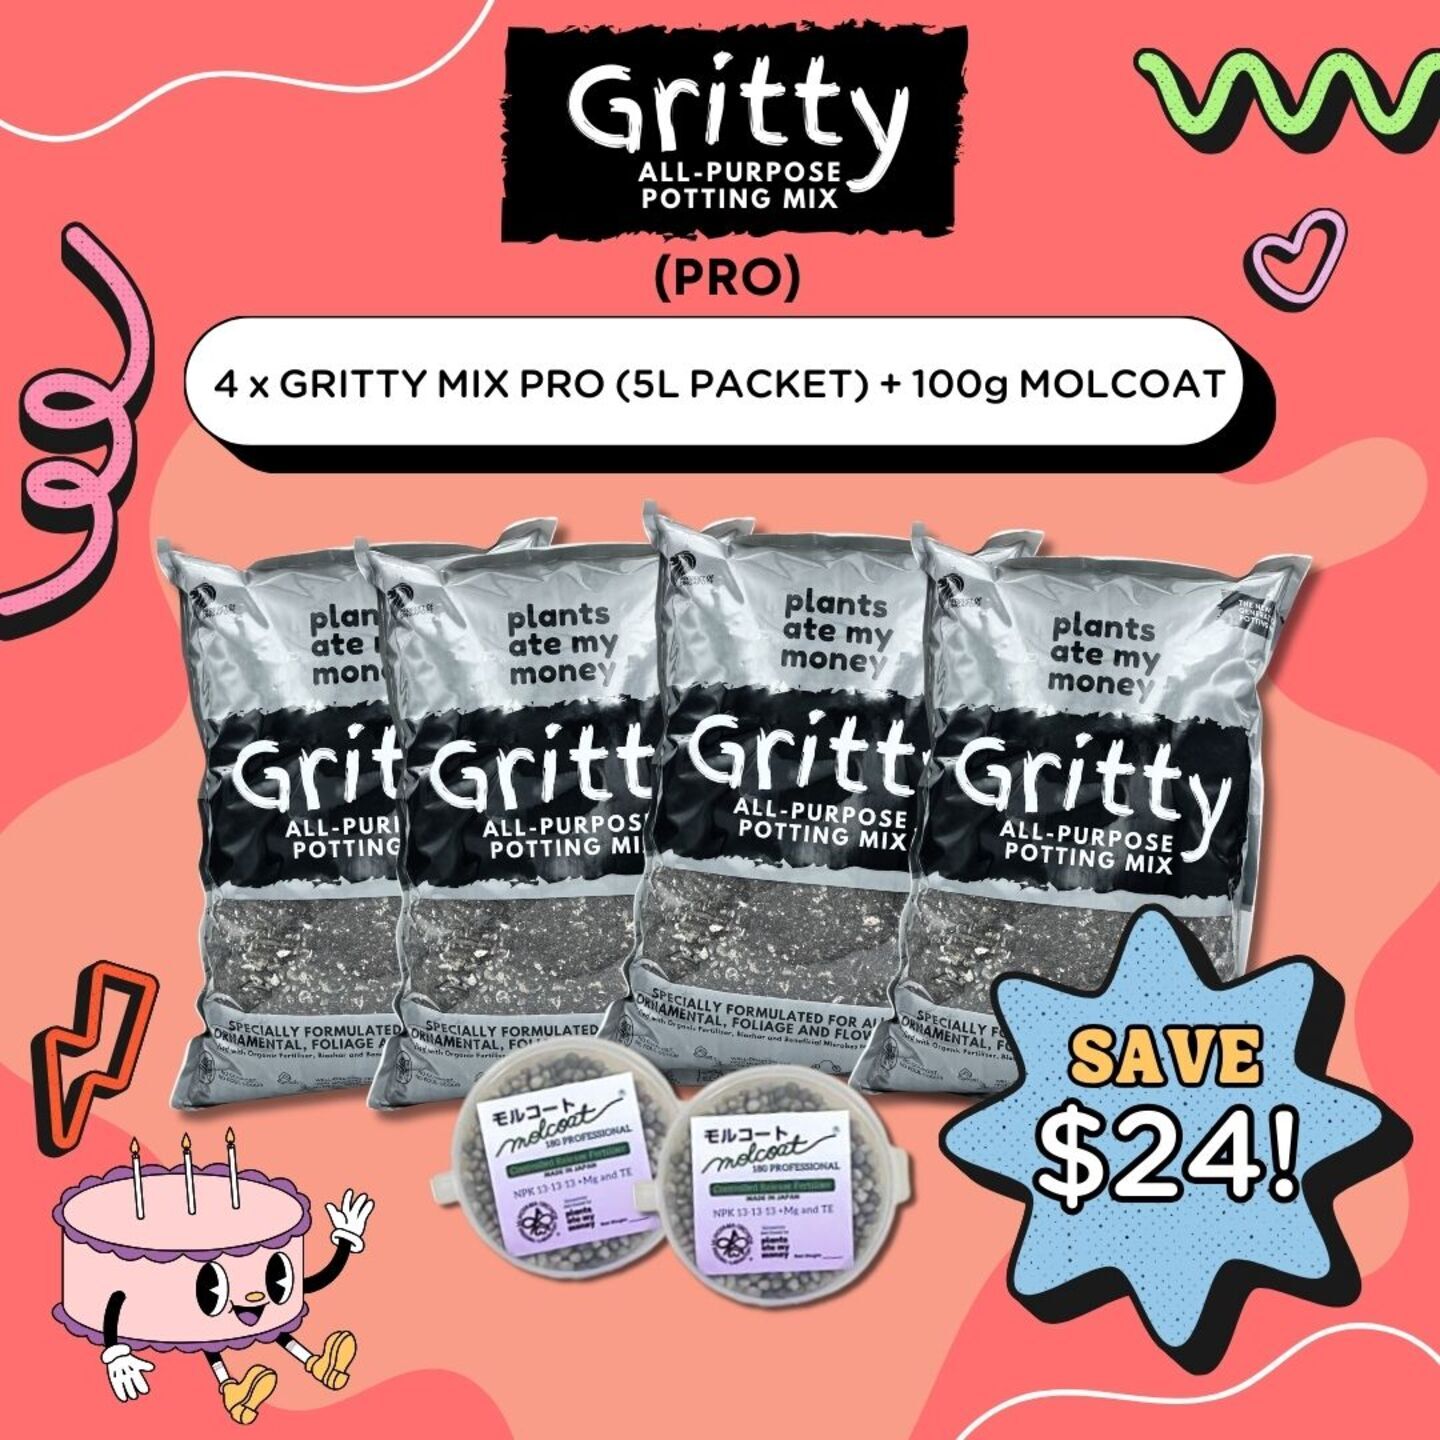 4 x GRITTY MIX PRO 5L PACKET + 100g MOLCOAT